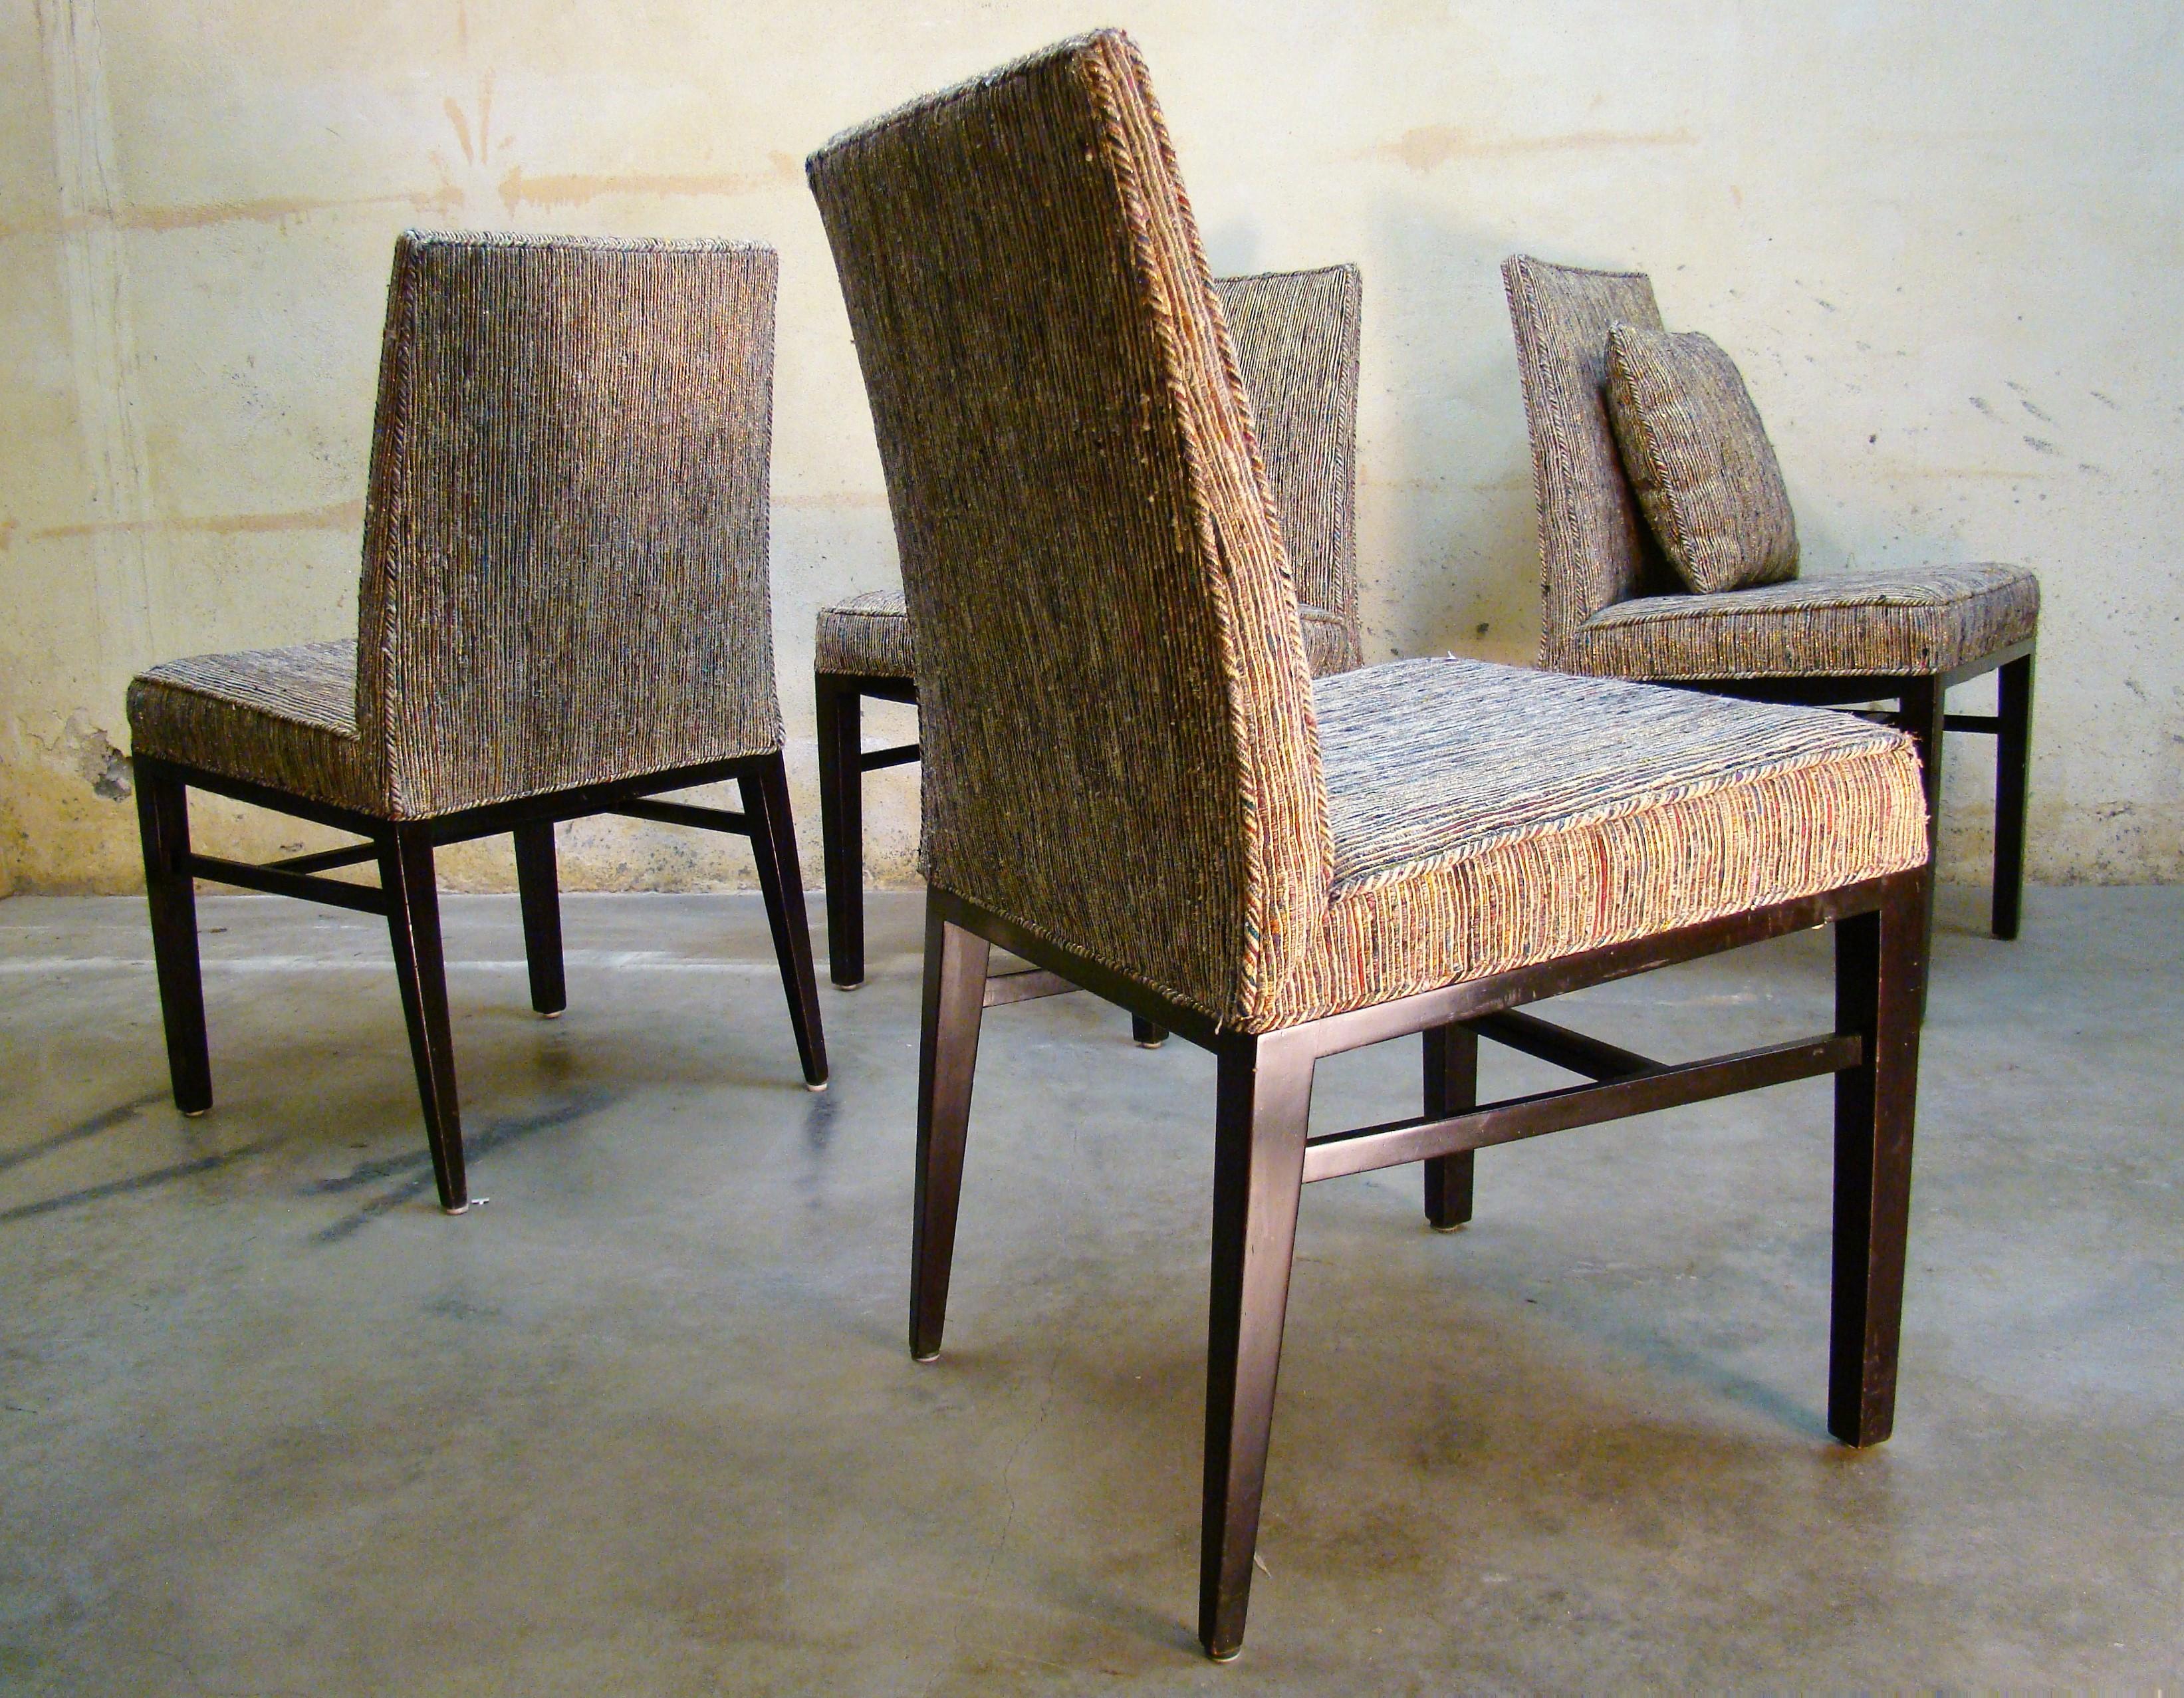 Beautiful set of four (mid-rise) Parsons dining chairs by Edward Wormley for Dunbar Furniture, circa 1959. Amazing original fabric and upholstery in usable condition with the welting worn slightly on two top corners. Heavy vertical pinstriped,